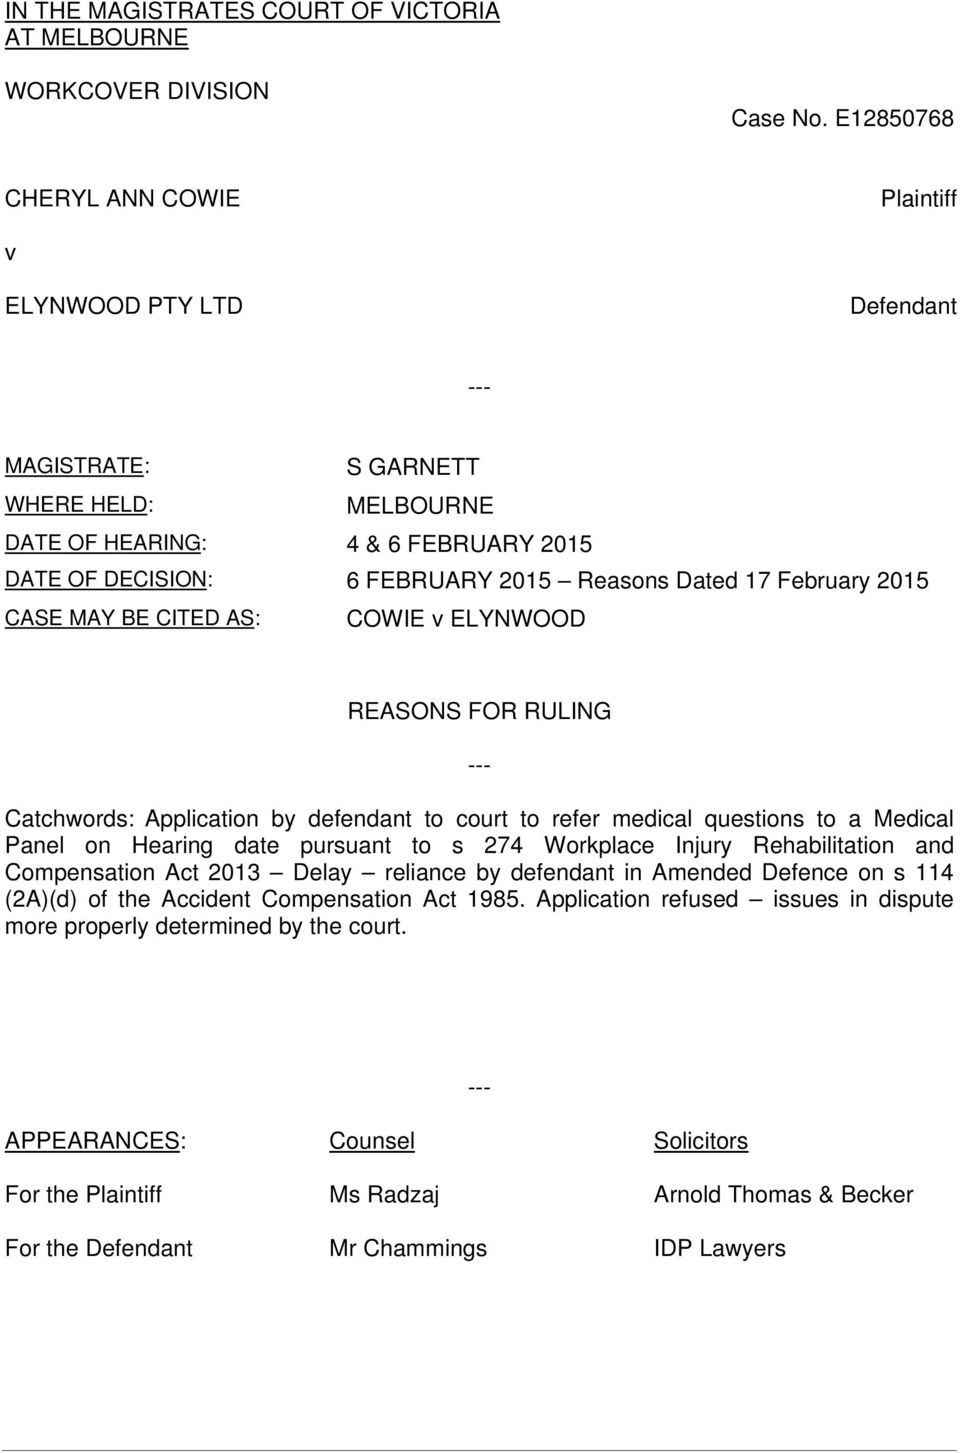 17 February 2015 CASE MAY BE CITED AS: COWIE v ELYNWOOD REASONS FOR RULING --- Catchwords: Application by defendant to court to refer medical questions to a Medical Panel on Hearing date pursuant to